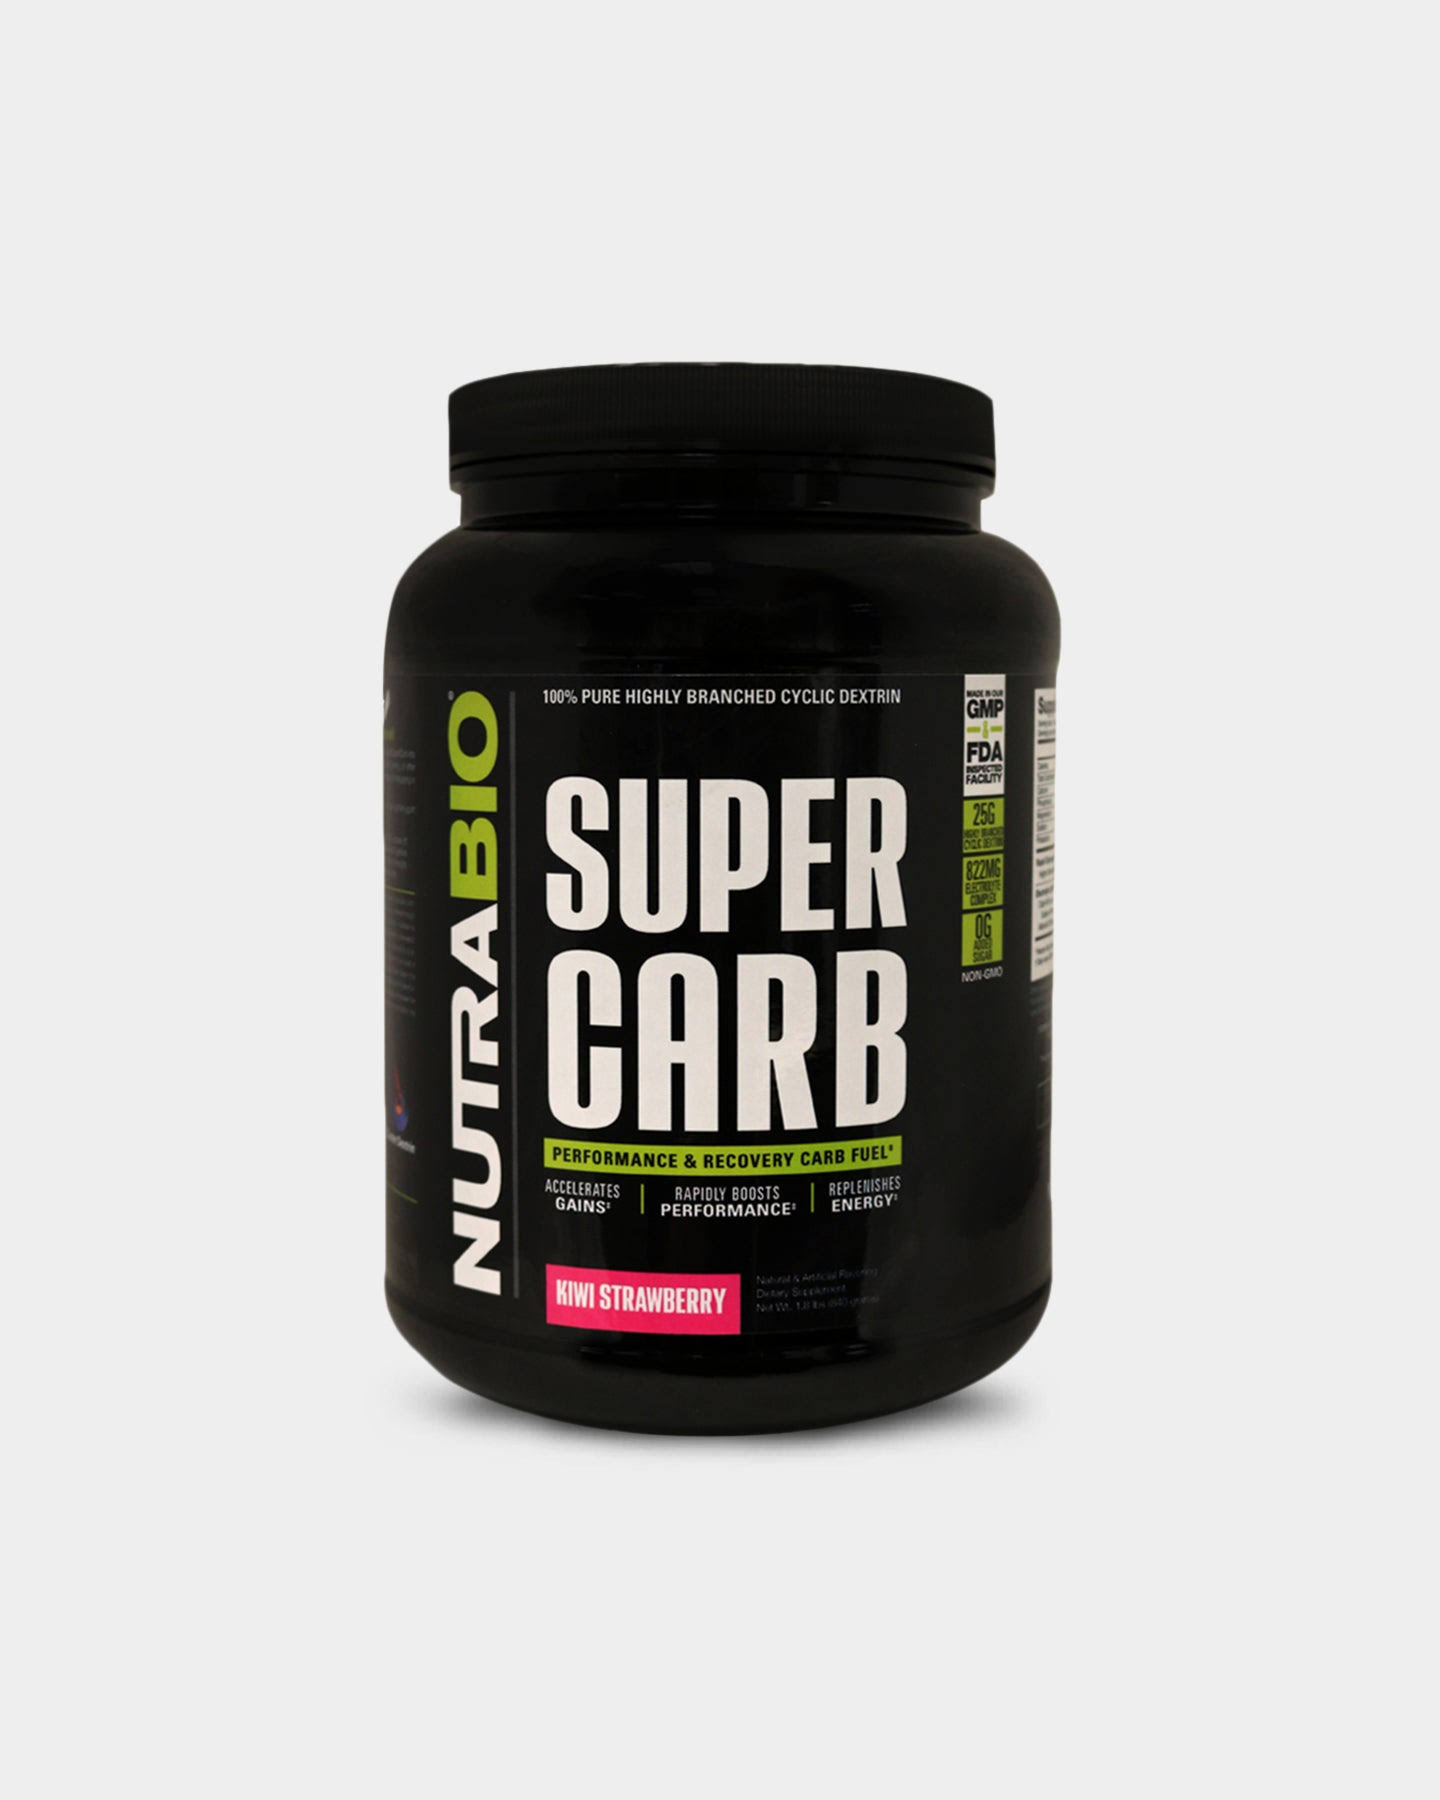 NutraBio Super Carb | during Workout | 30 Servings - Kiwi Strawberry